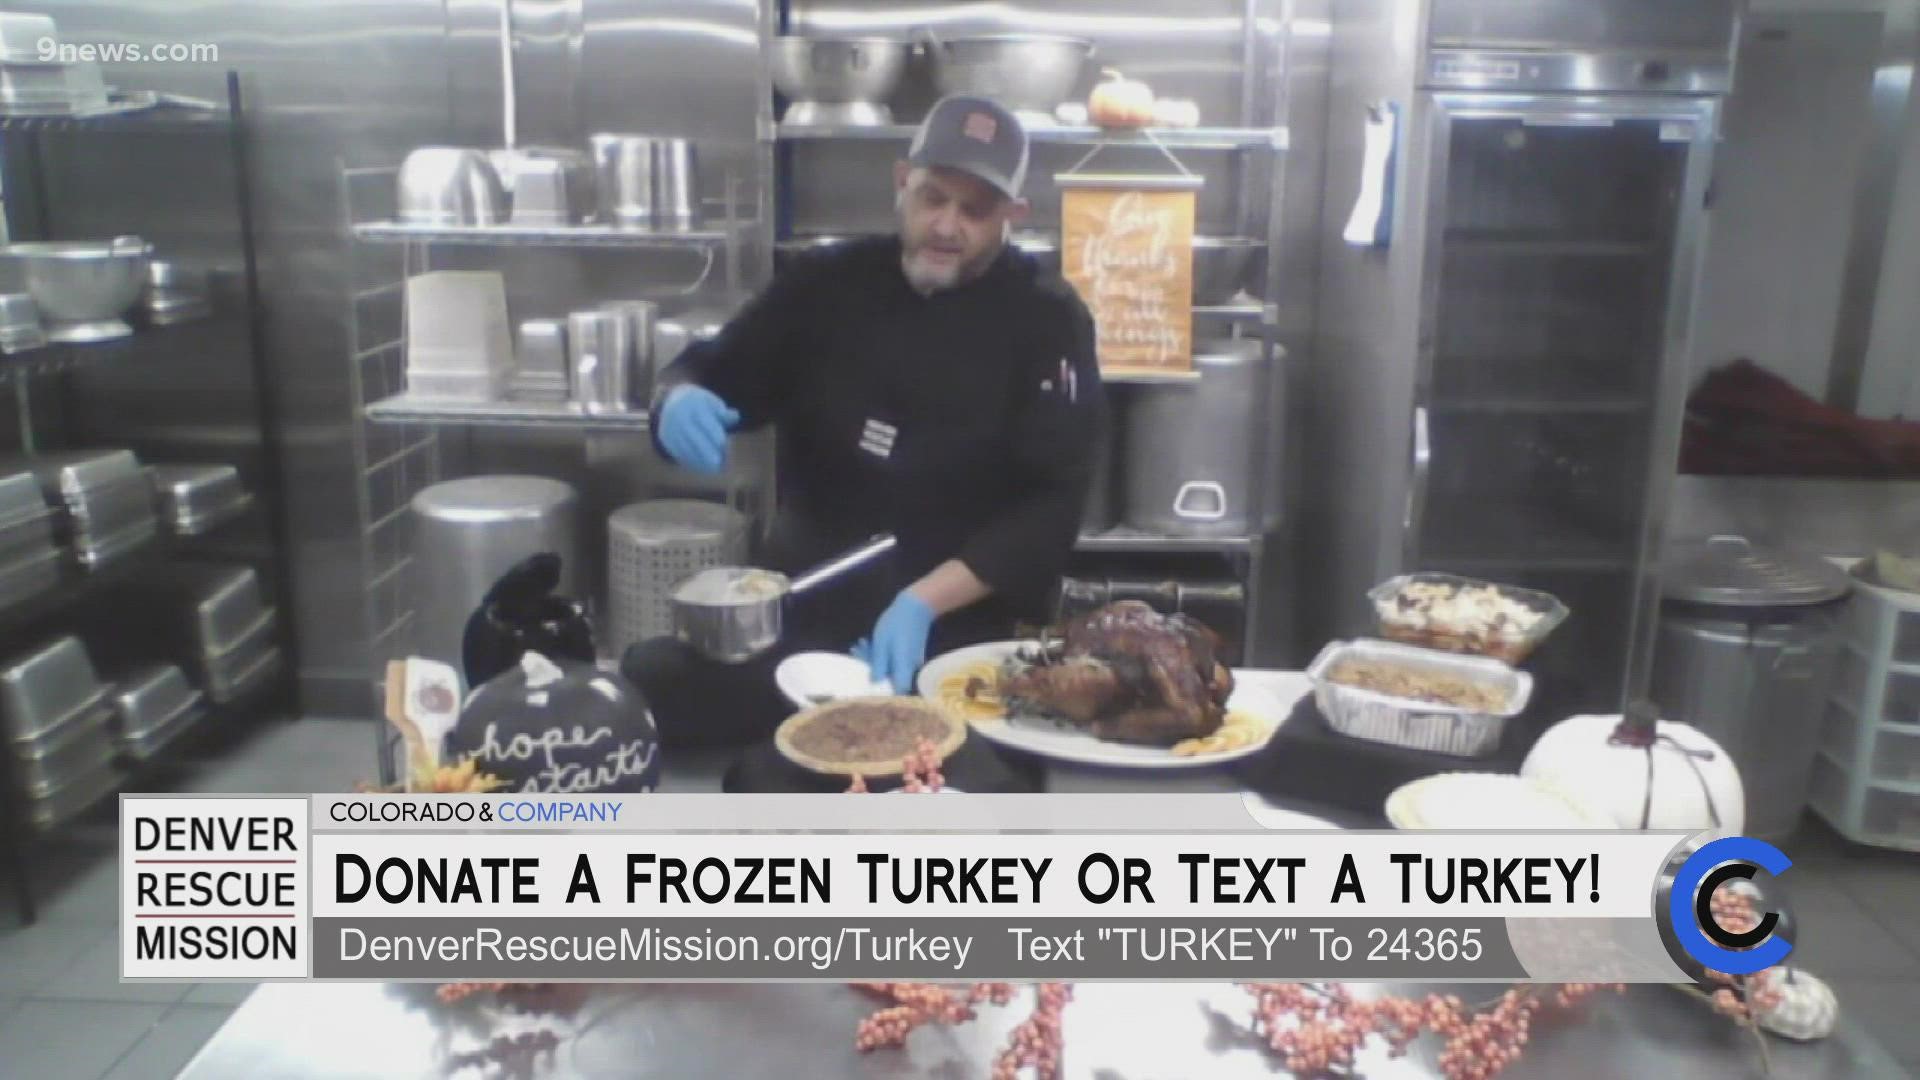 Help the Denver Rescue Mission get turkeys to families in need. Donate online at DenverRescueMission.org/Turkey.